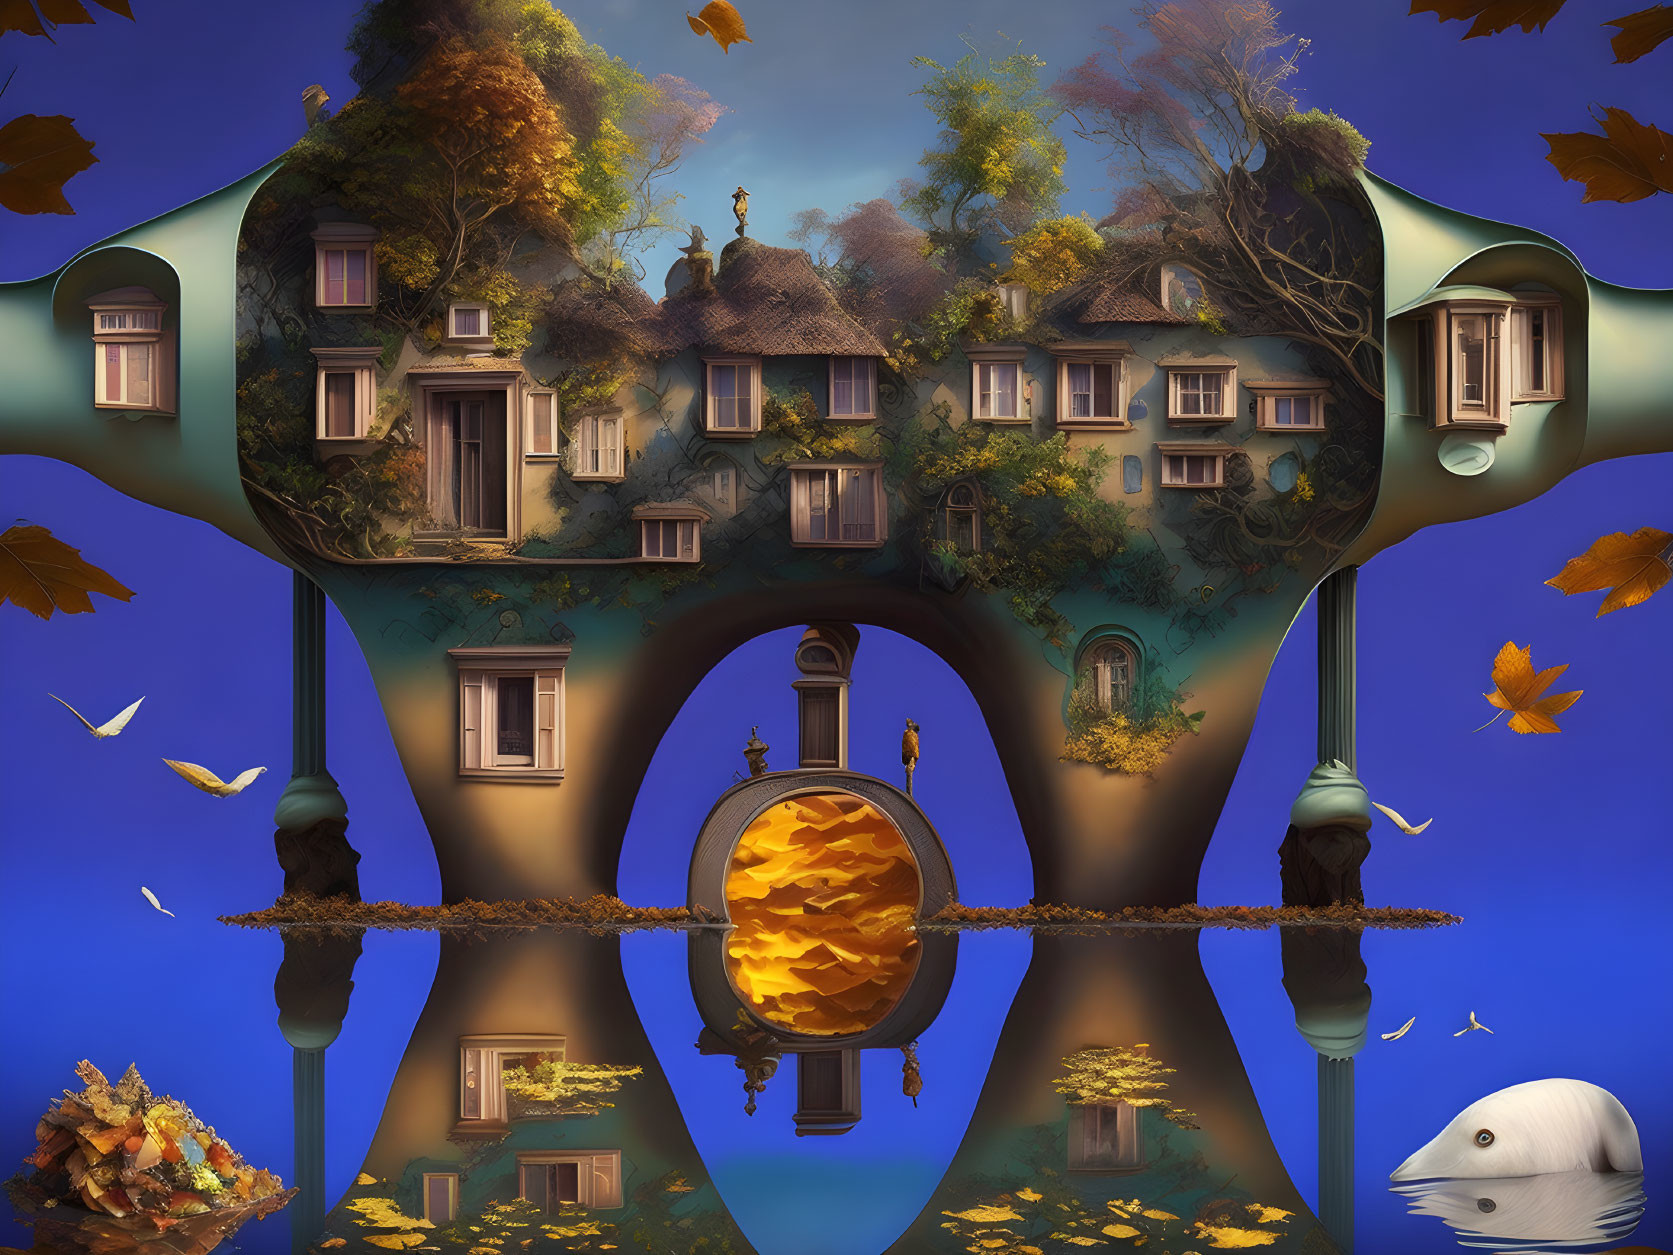 Surreal landscape with warped tree structure and golden mirror in a blue sky